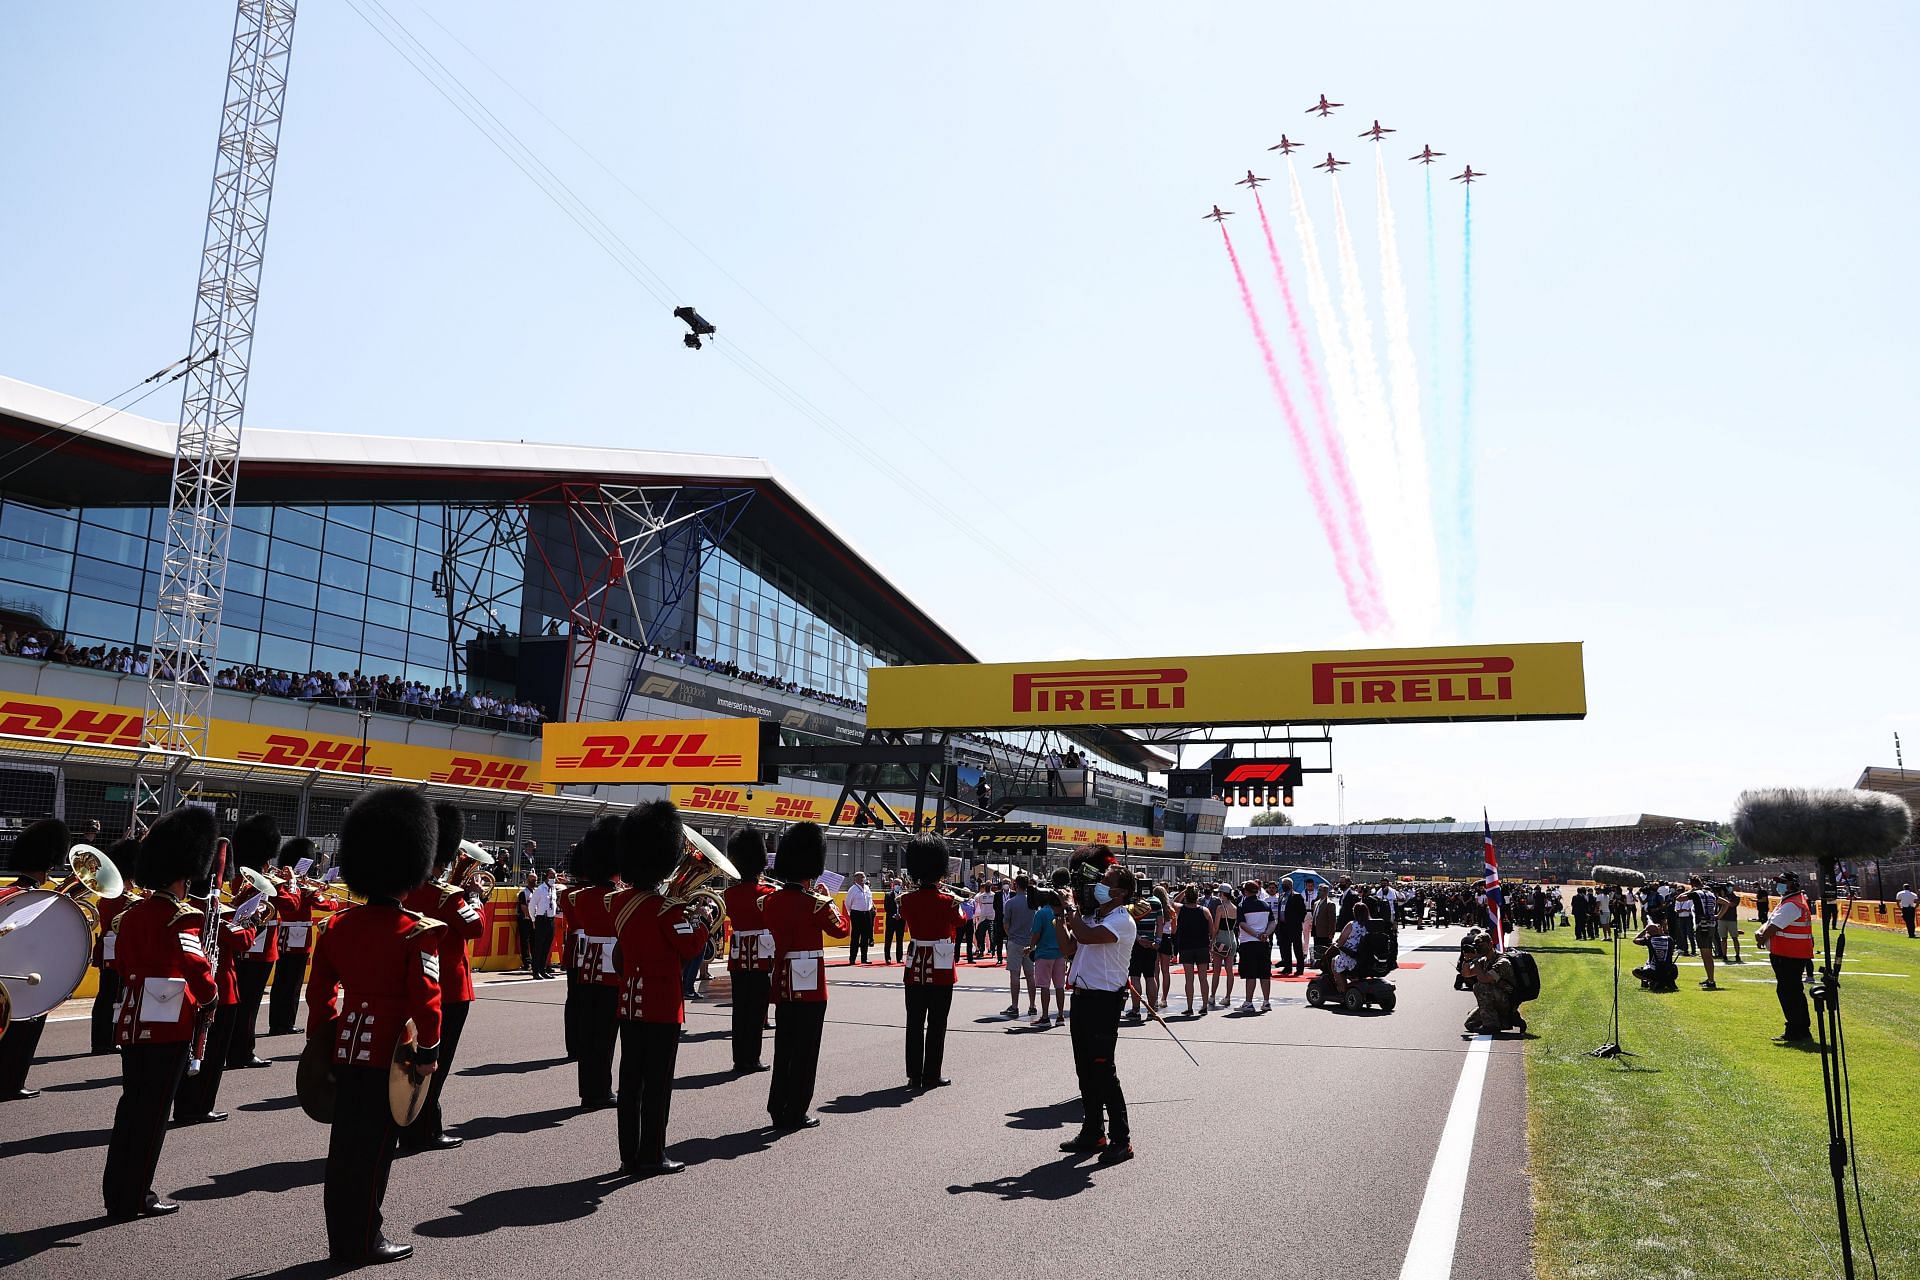 A general view of the grid before the F1 Grand Prix of Great Britain at Silverstone on July 18, 2021 in Northampton, England. (Photo by Lars Baron/Getty Images)